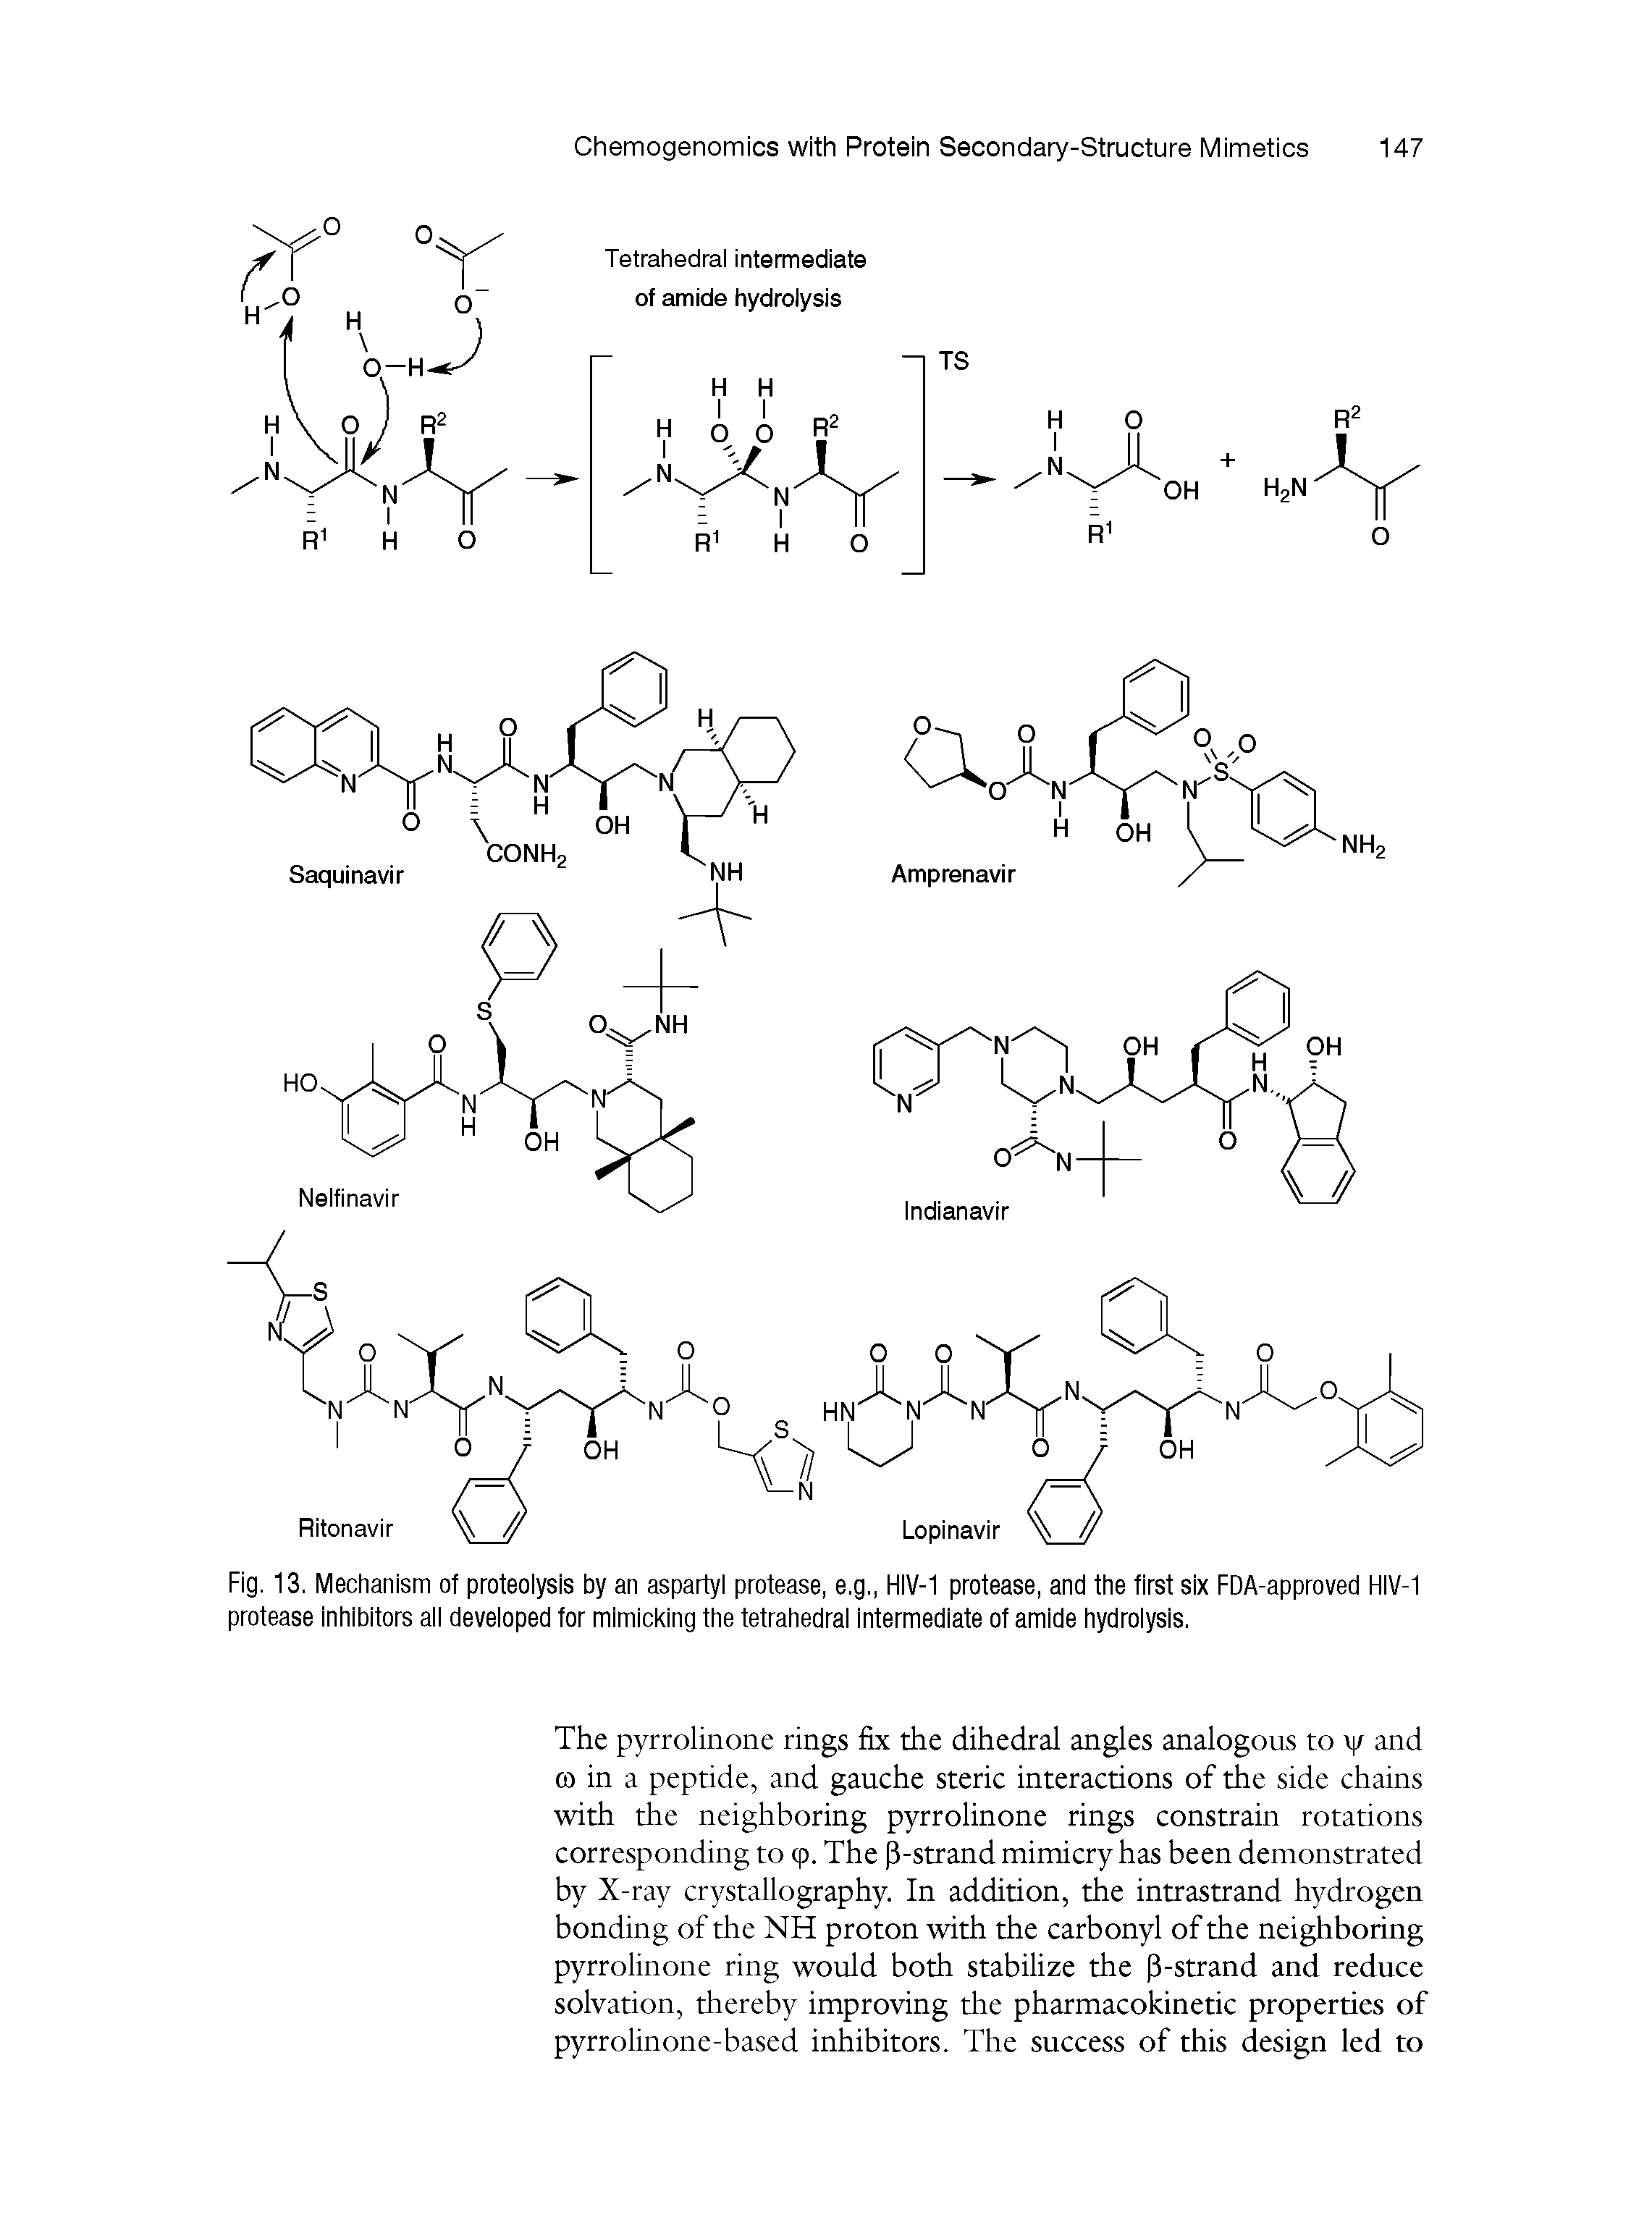 Fig. 13. Mechanism of proteolysis by an aspartyl protease, e.g., HIV-1 protease, and the first six FDA-approved HIV-1 protease inhibitors all developed for mimicking the tetrahedral intermediate of amide hydrolysis.